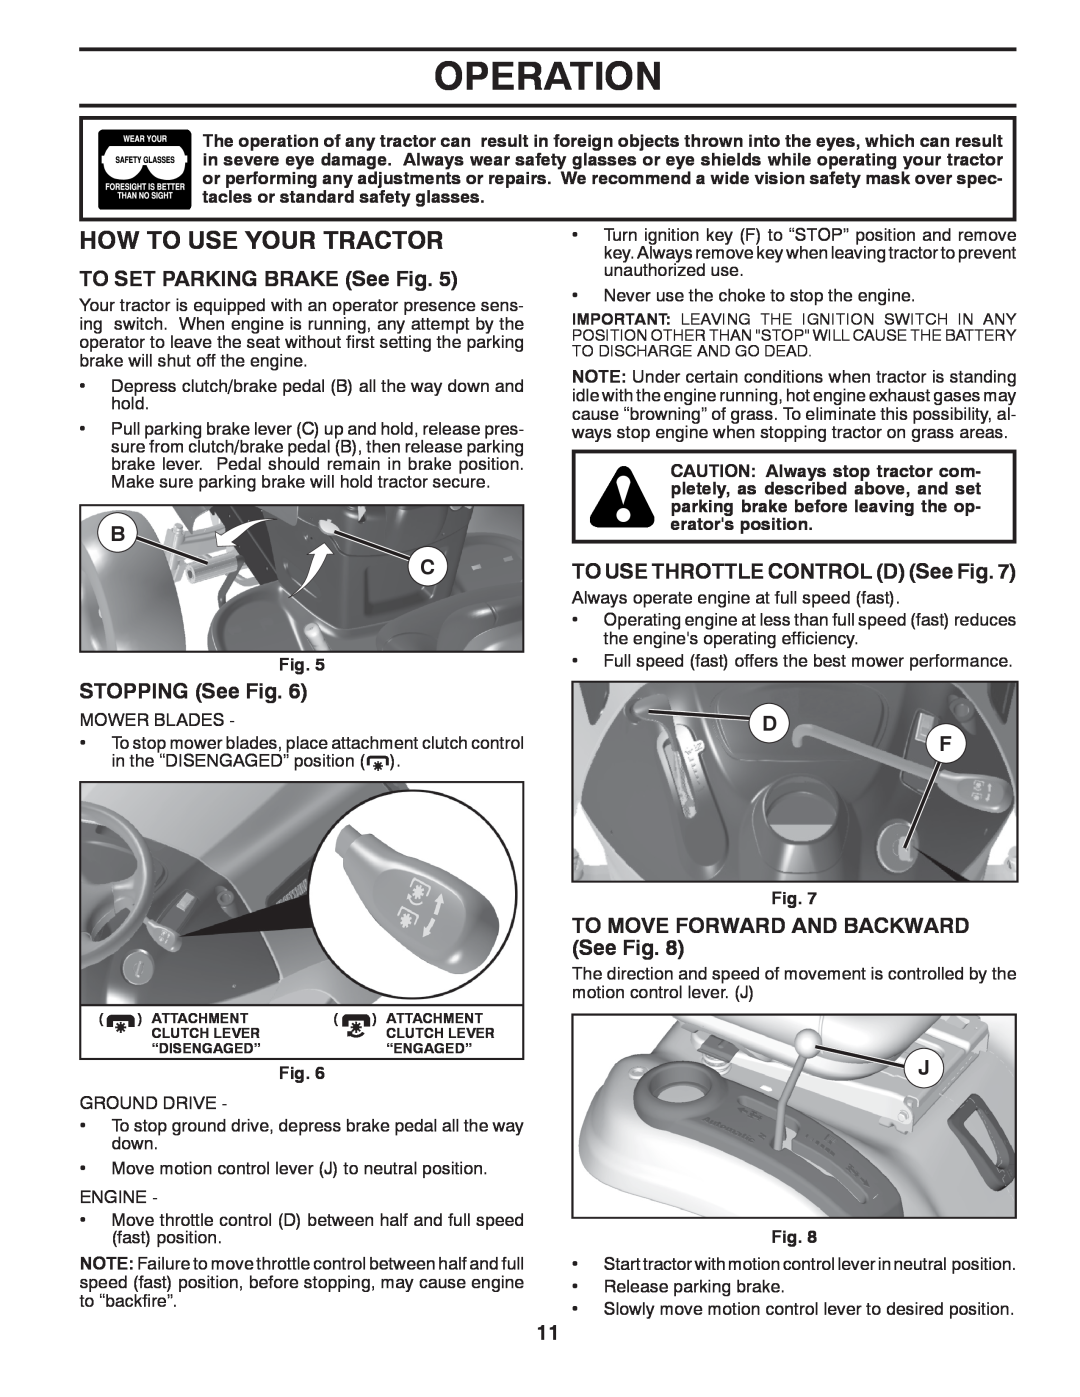 McCulloch M17538H How To Use Your Tractor, Operation, TO SET PARKING BRAKE See Fig, TO USE THROTTLE CONTROL D See Fig 